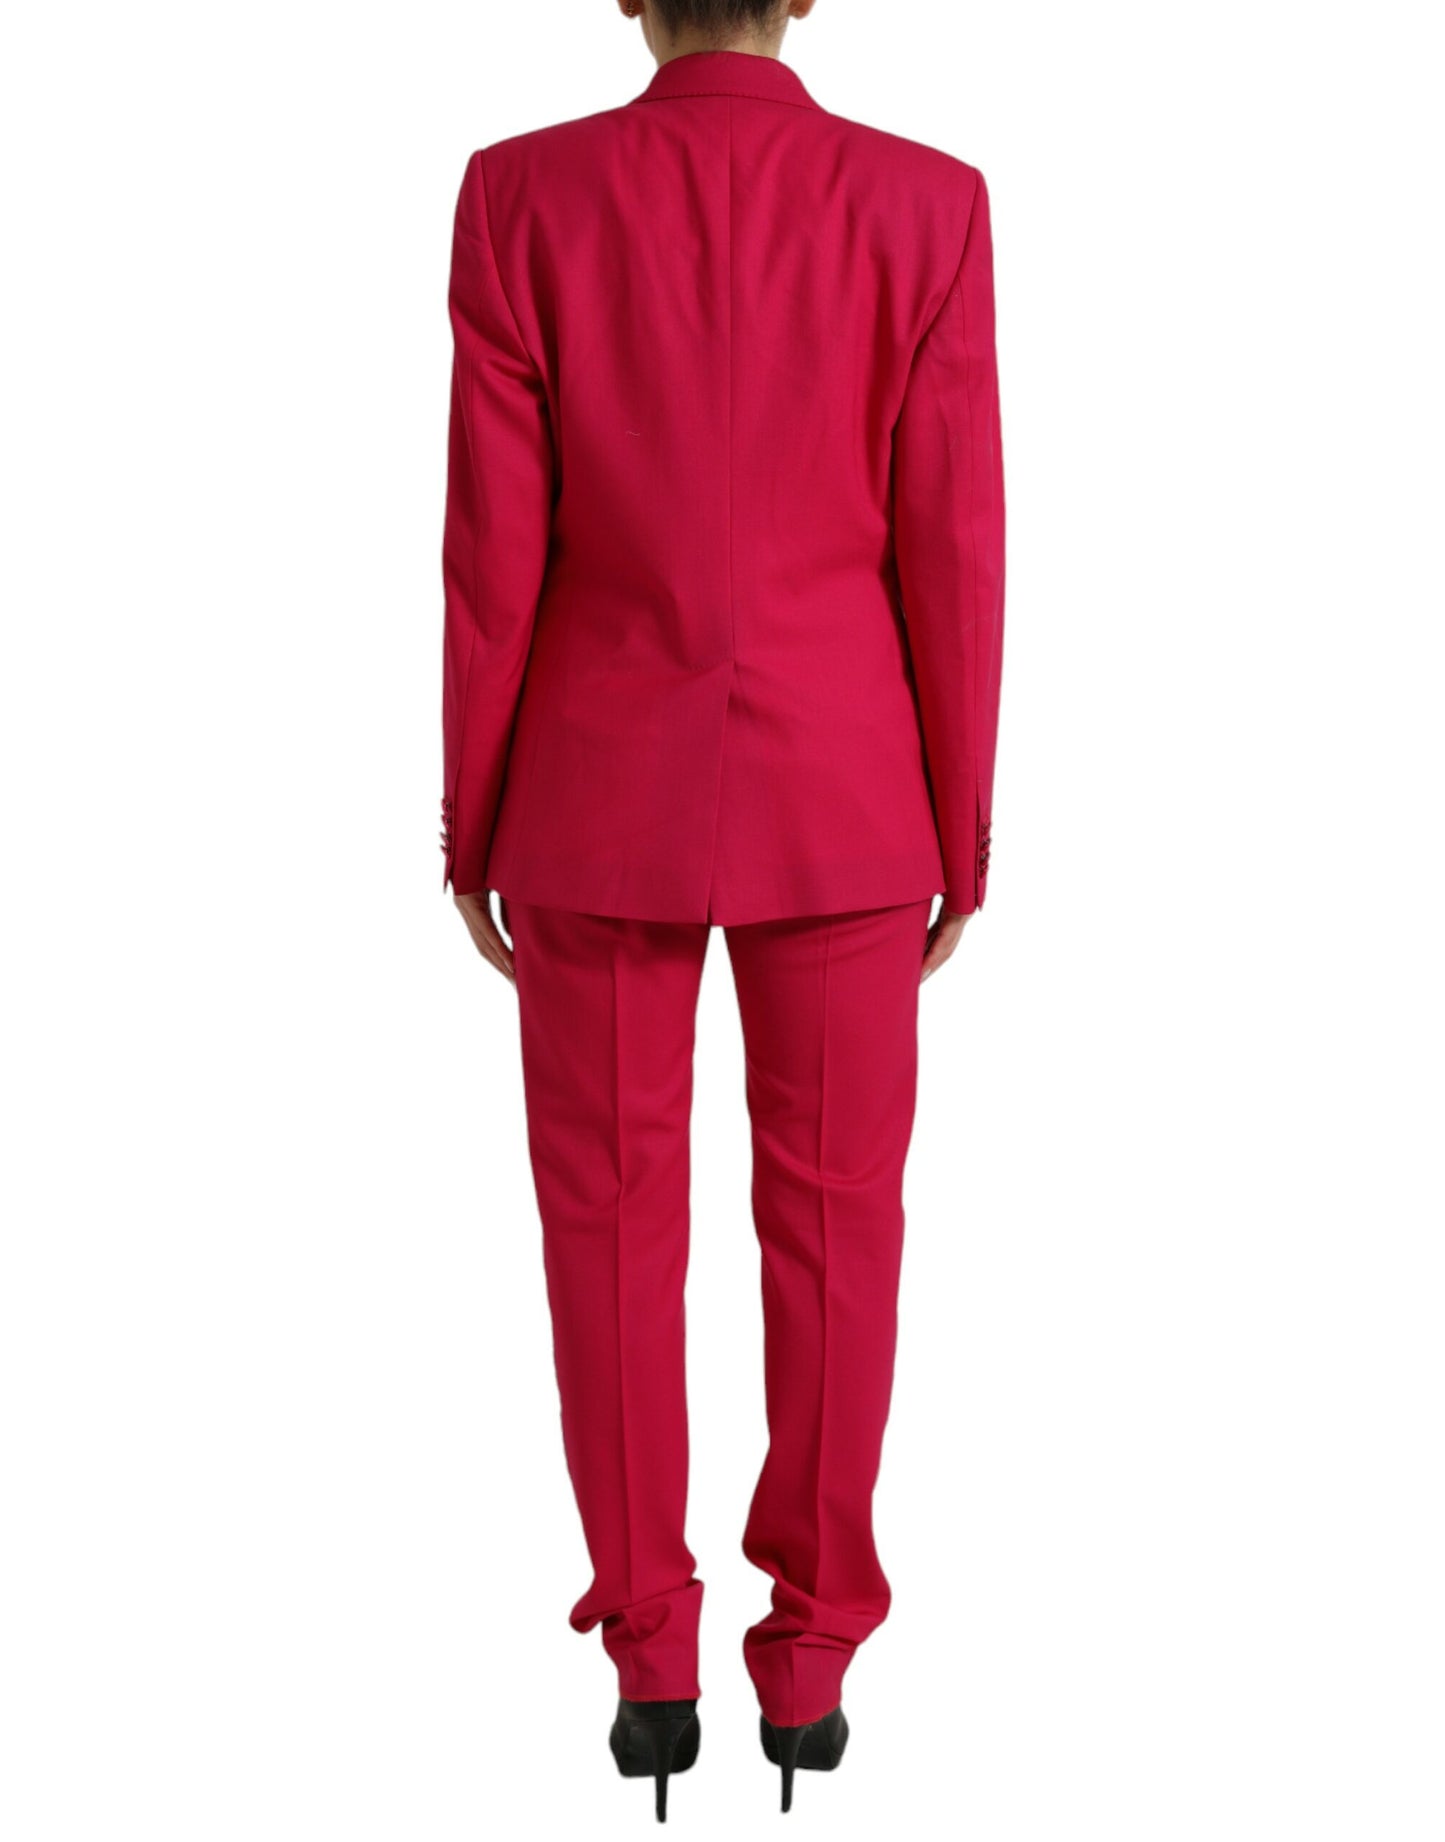 Red MARTINI Wool Slim Fit 3 Piece Suit